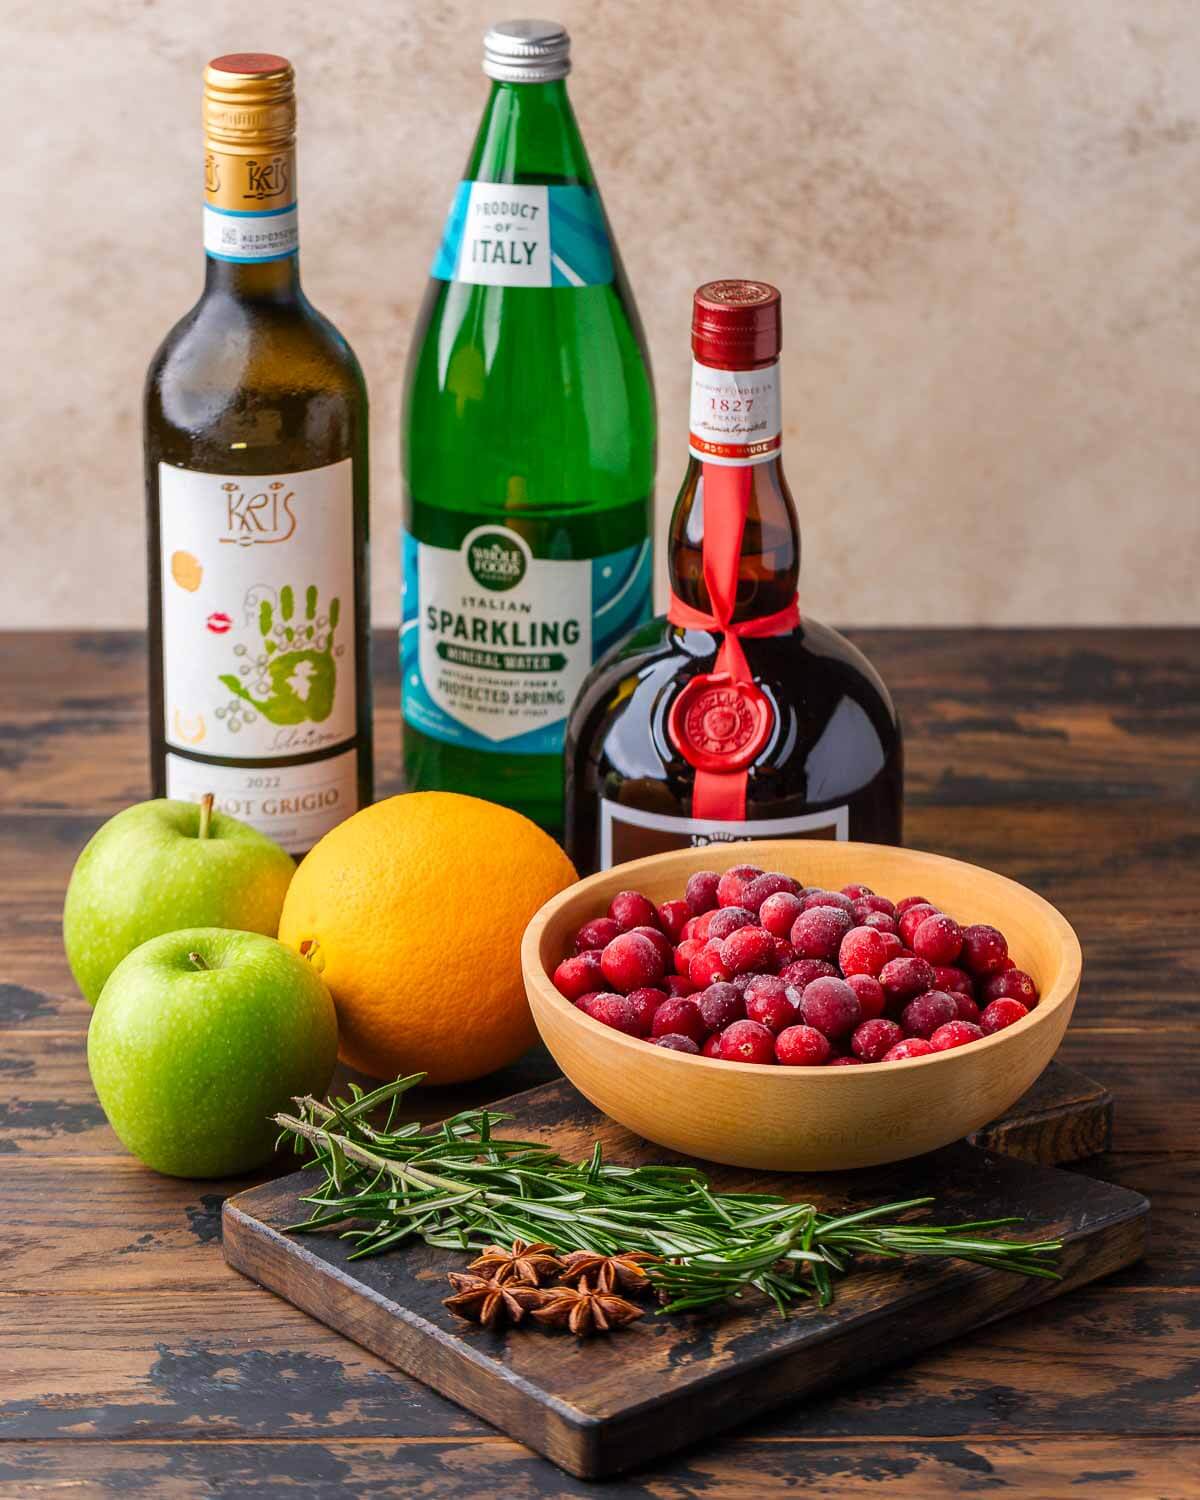 Ingredients shown: white wine, sparkling water, Gran Marnier, apples, oranage, cranberries, rosemary, and star anise.